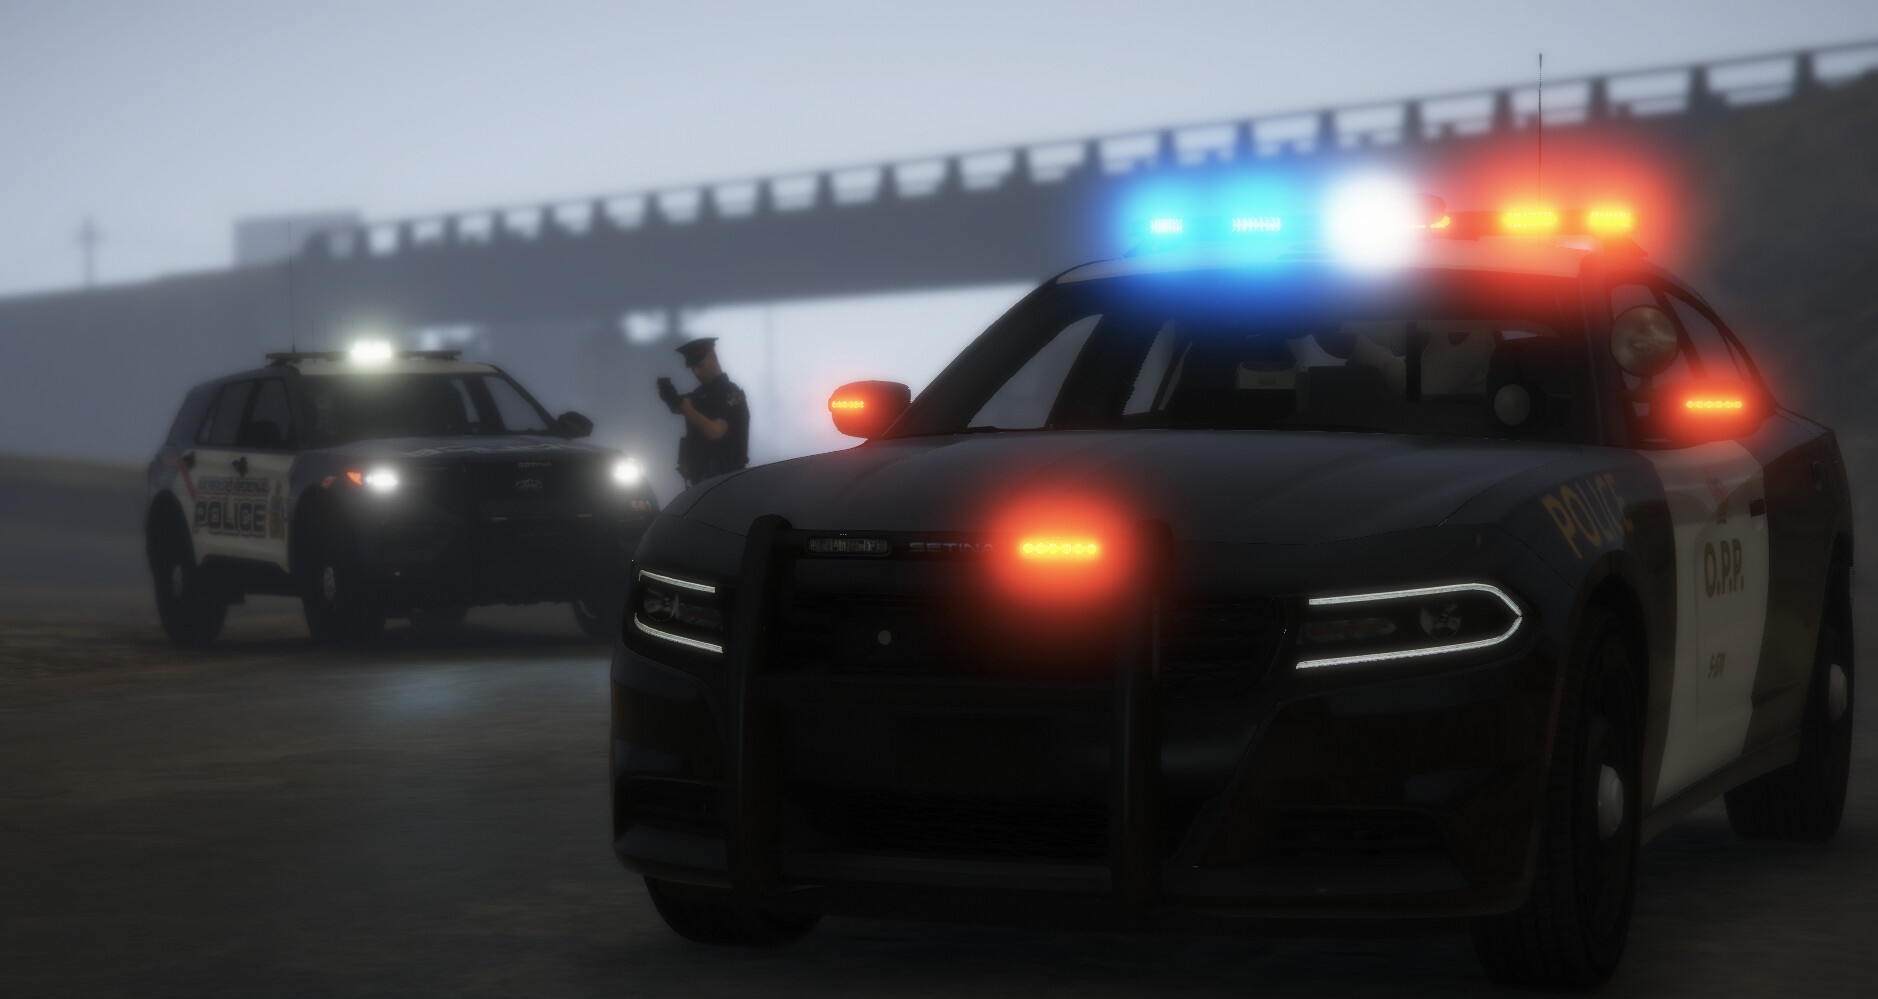 Greater Ontario Roleplay Serious Professional Custom Vehicles Custom Scripts Custom Eup Ontario Provincial Police Fire Ems Civilian Operations Recruiting Server Bazaar Cfx Re Community - roblox police roleplay games